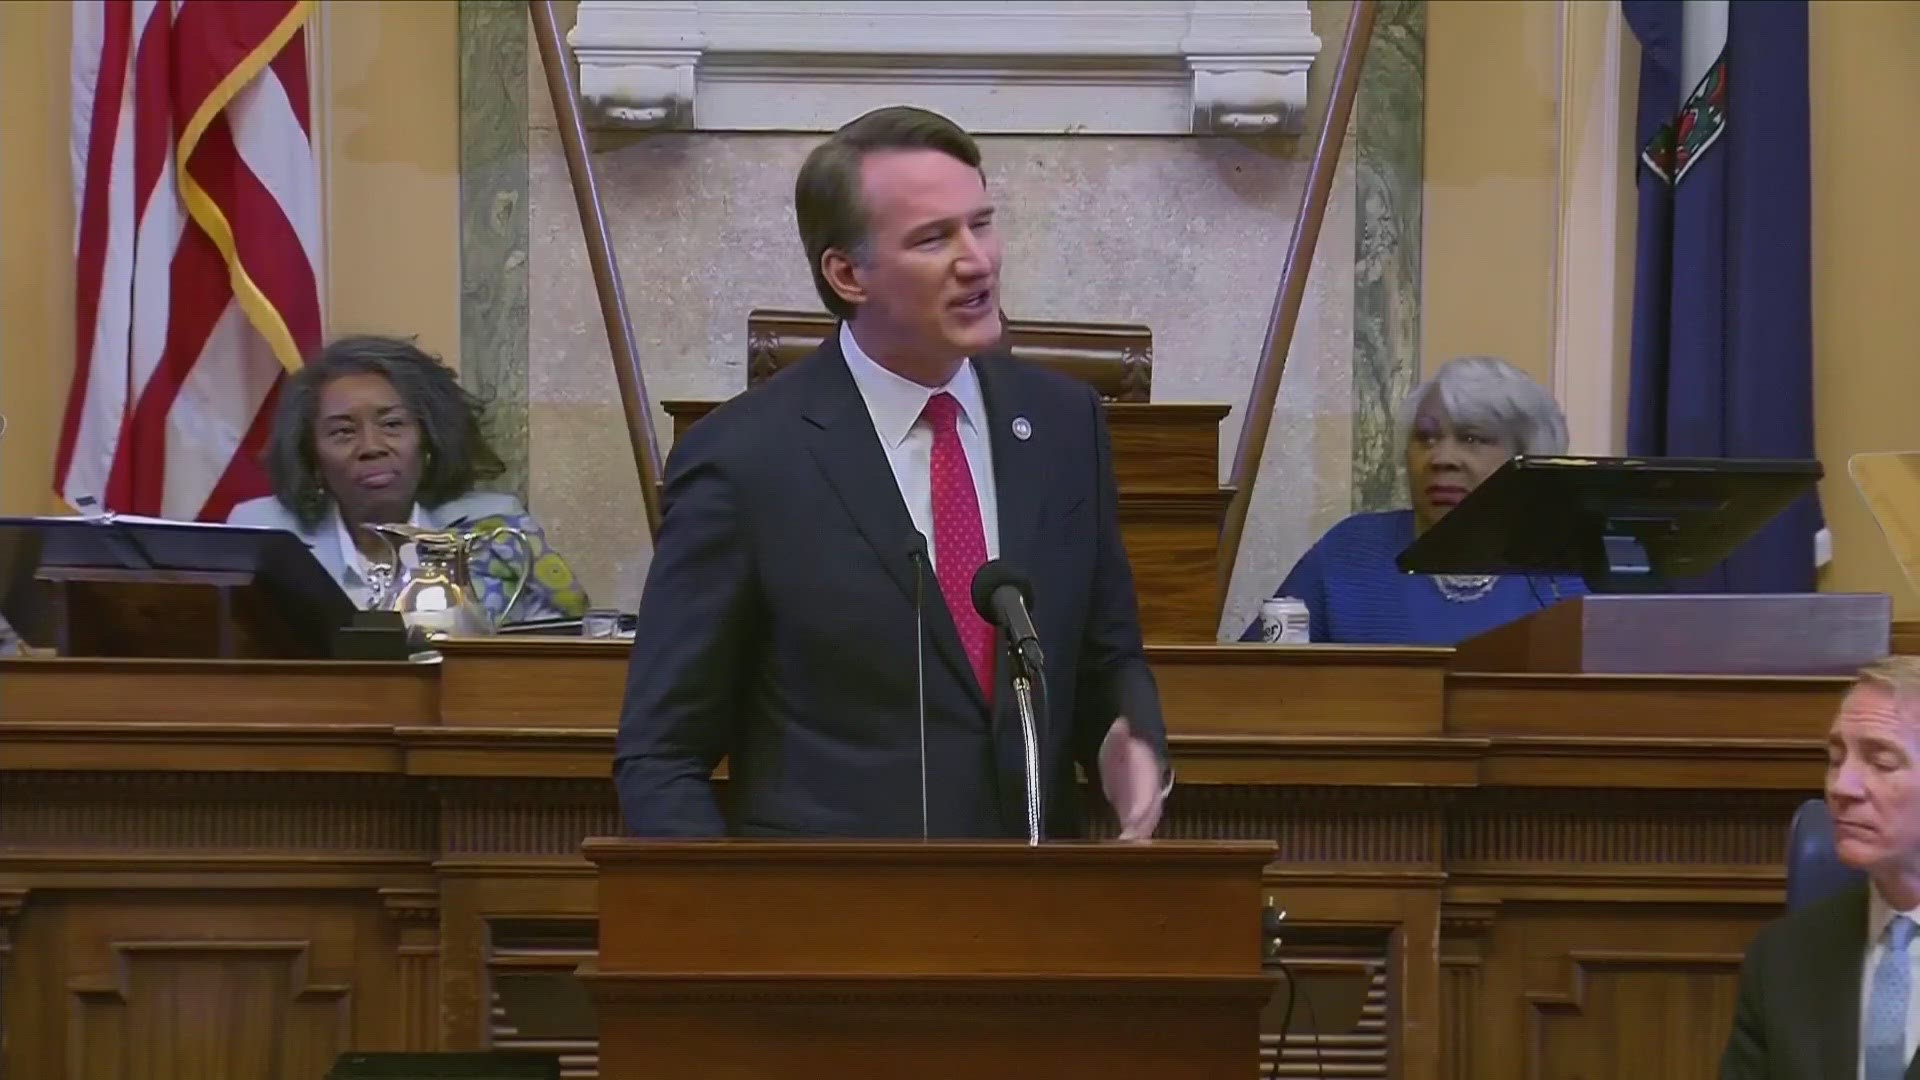 Virginia Governor Glenn Youngkin wrapped up his State of the Commonwealth address -- as lawmakers began their new session in Richmond.